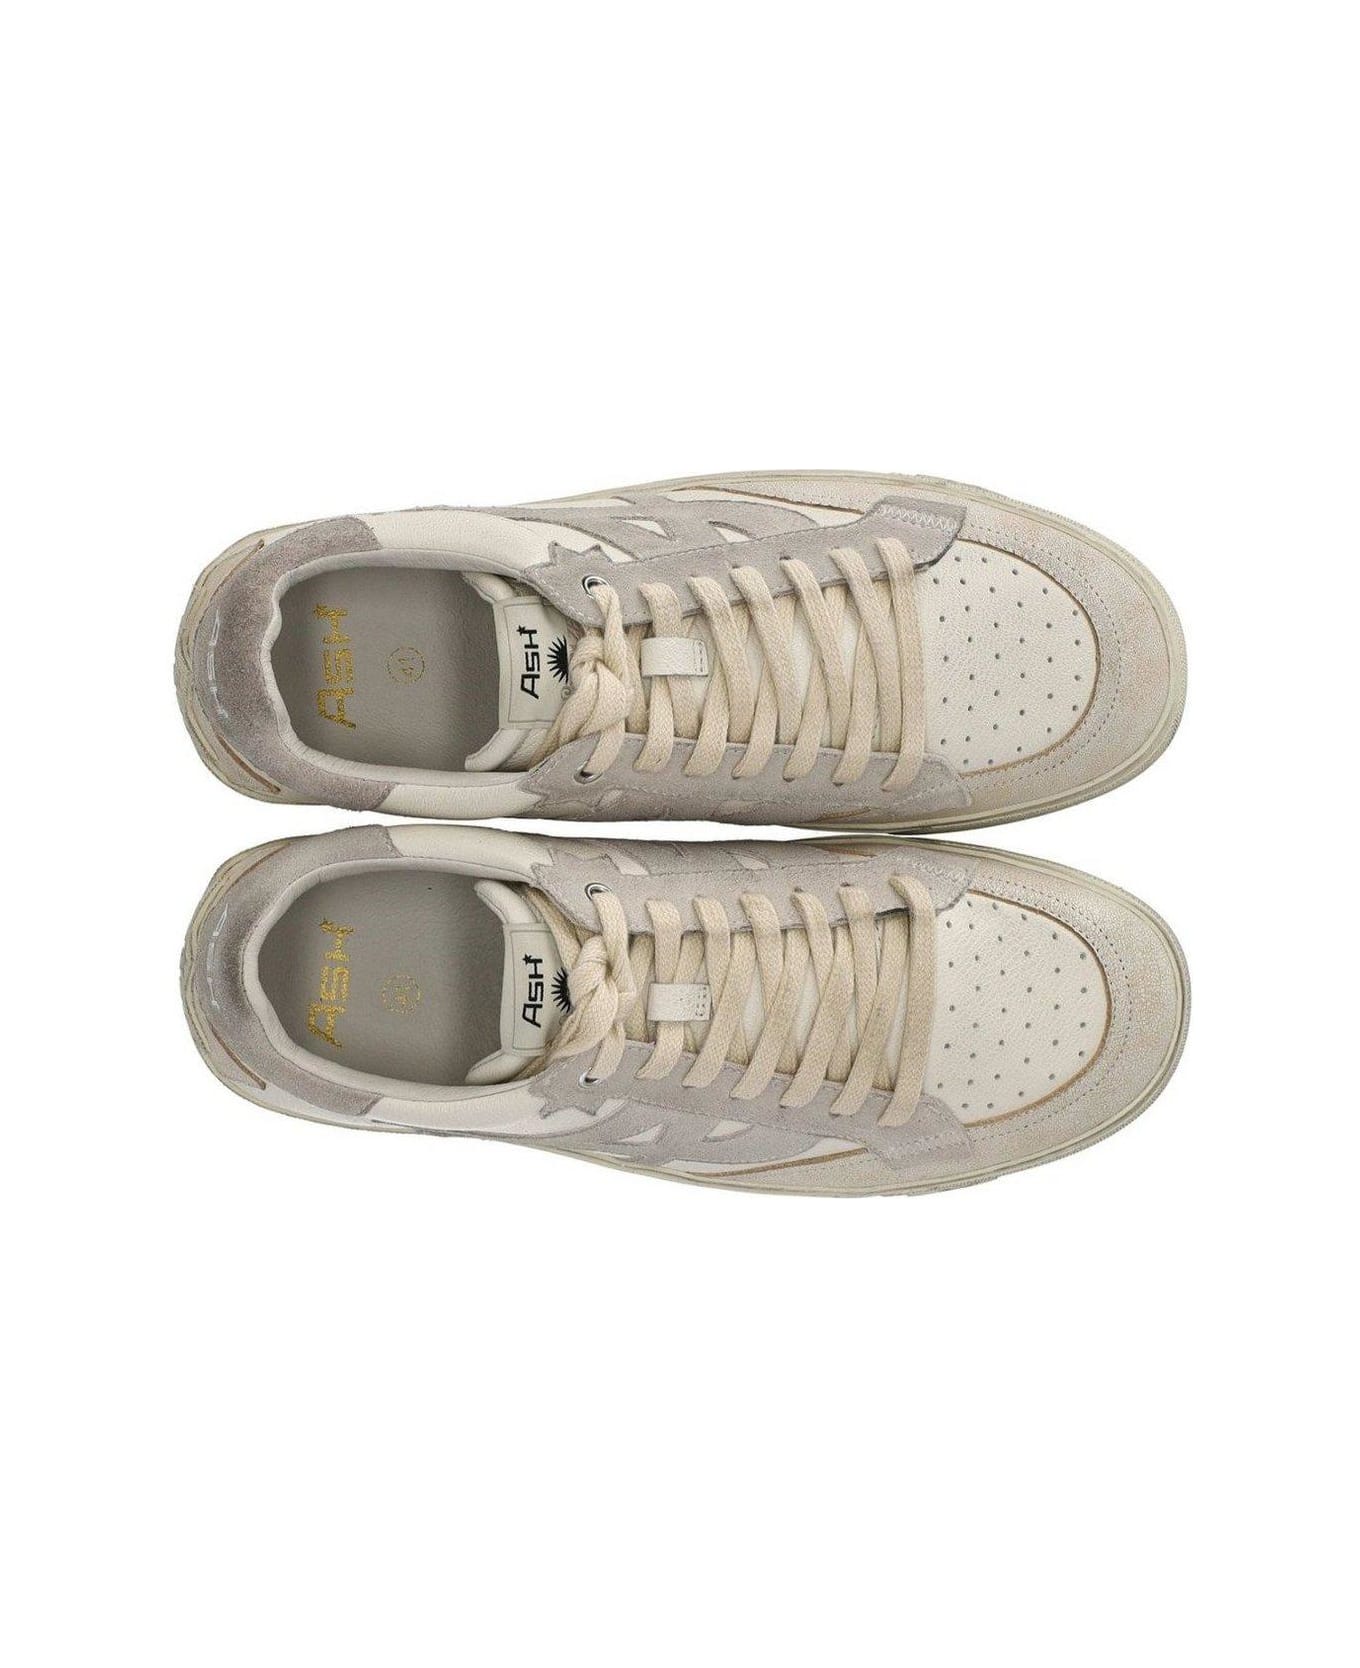 Ash Moonlight Lace-up Sneakers - Beige